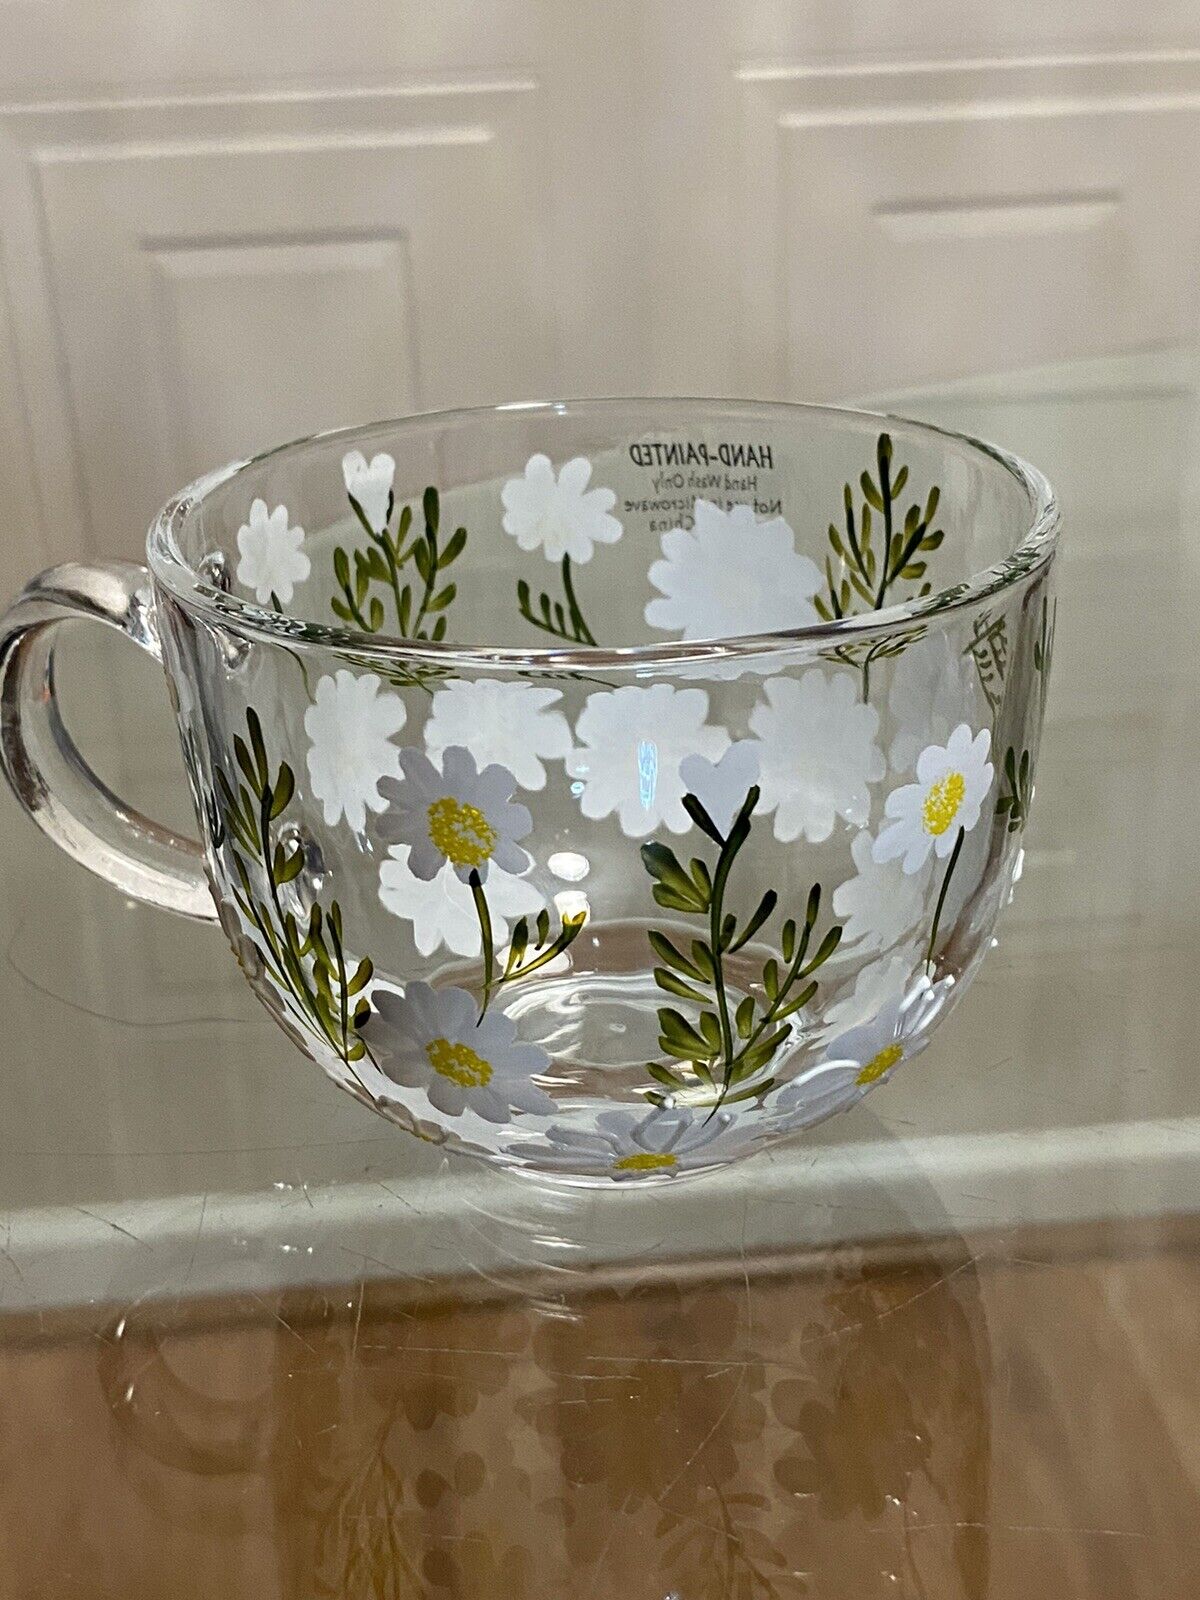 Brand New Hand-Painted Daisies Rose Floral L Glass Coffee Tea Mug